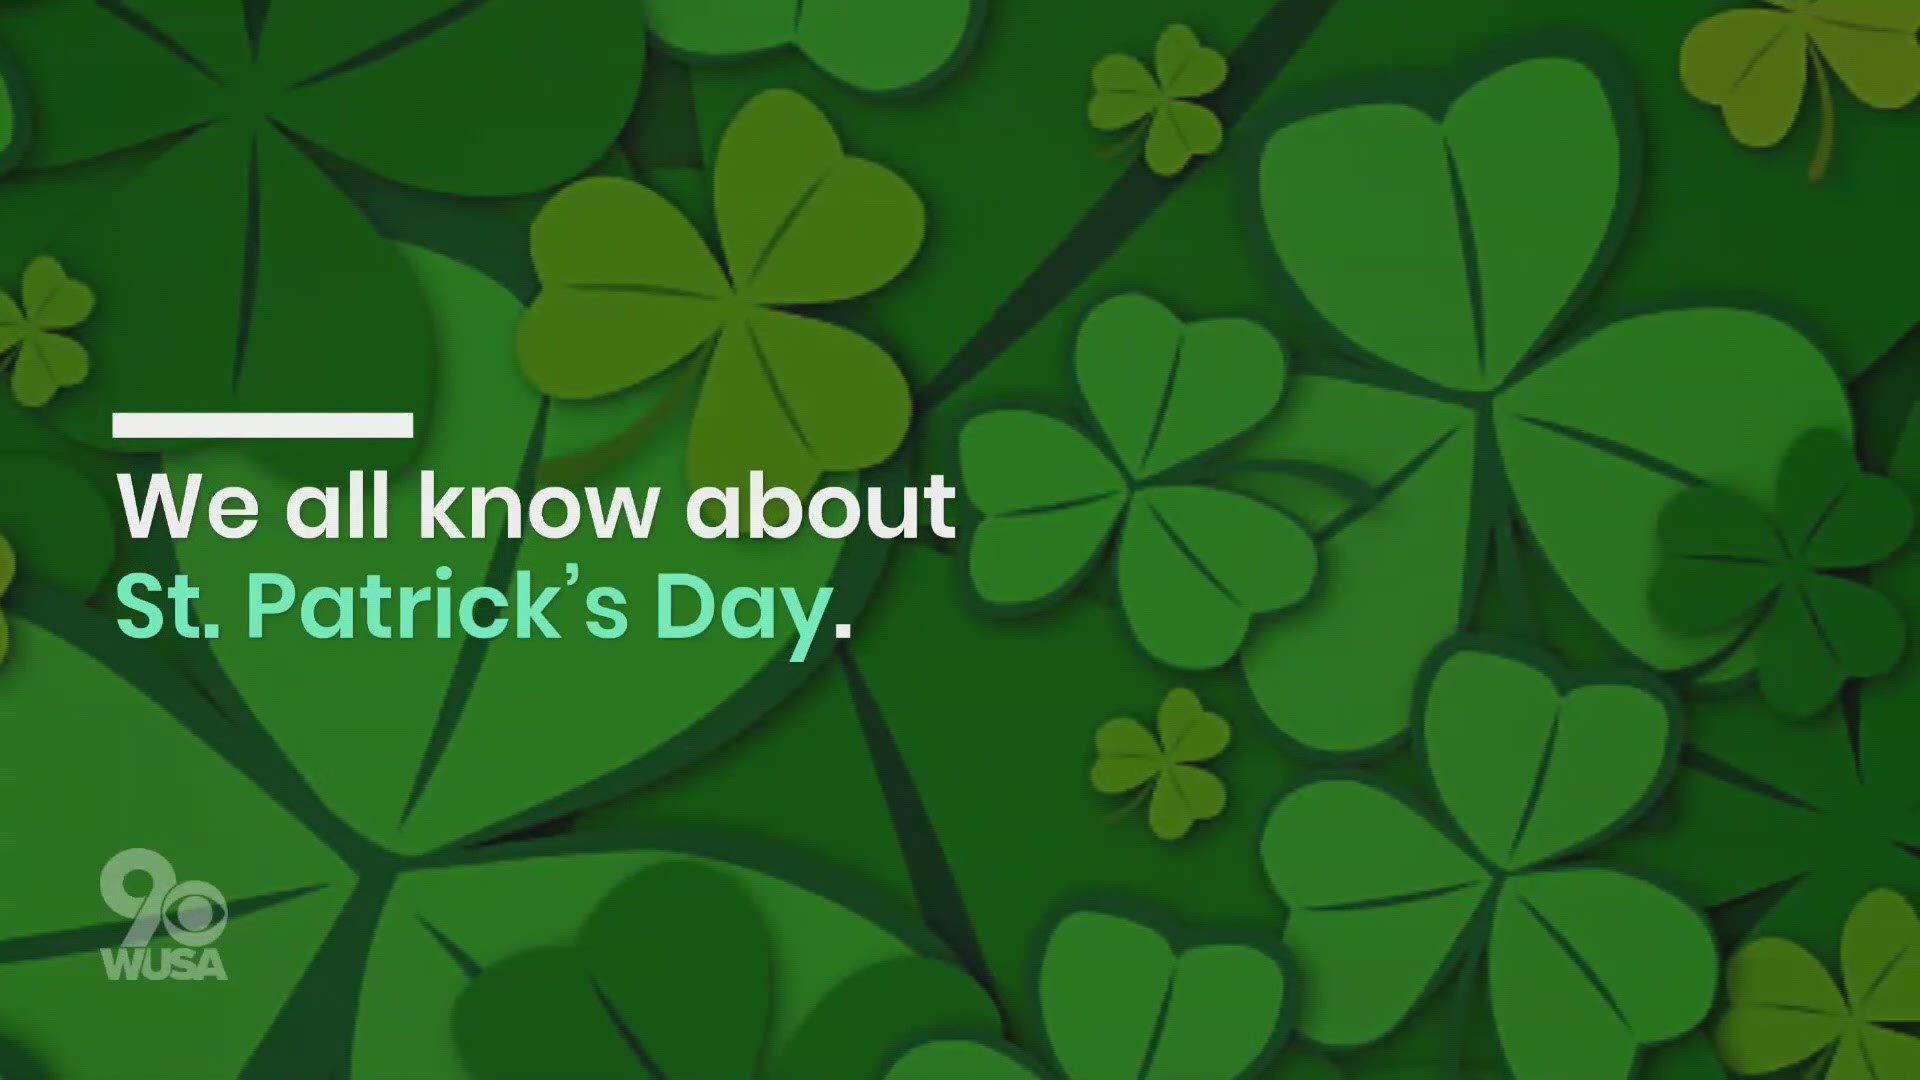 Every year, many celebrate St. Patrick's Day on March 17.  There are parties and parades, and many shamrocks about.  But what do we know about Patrick of Ireland?